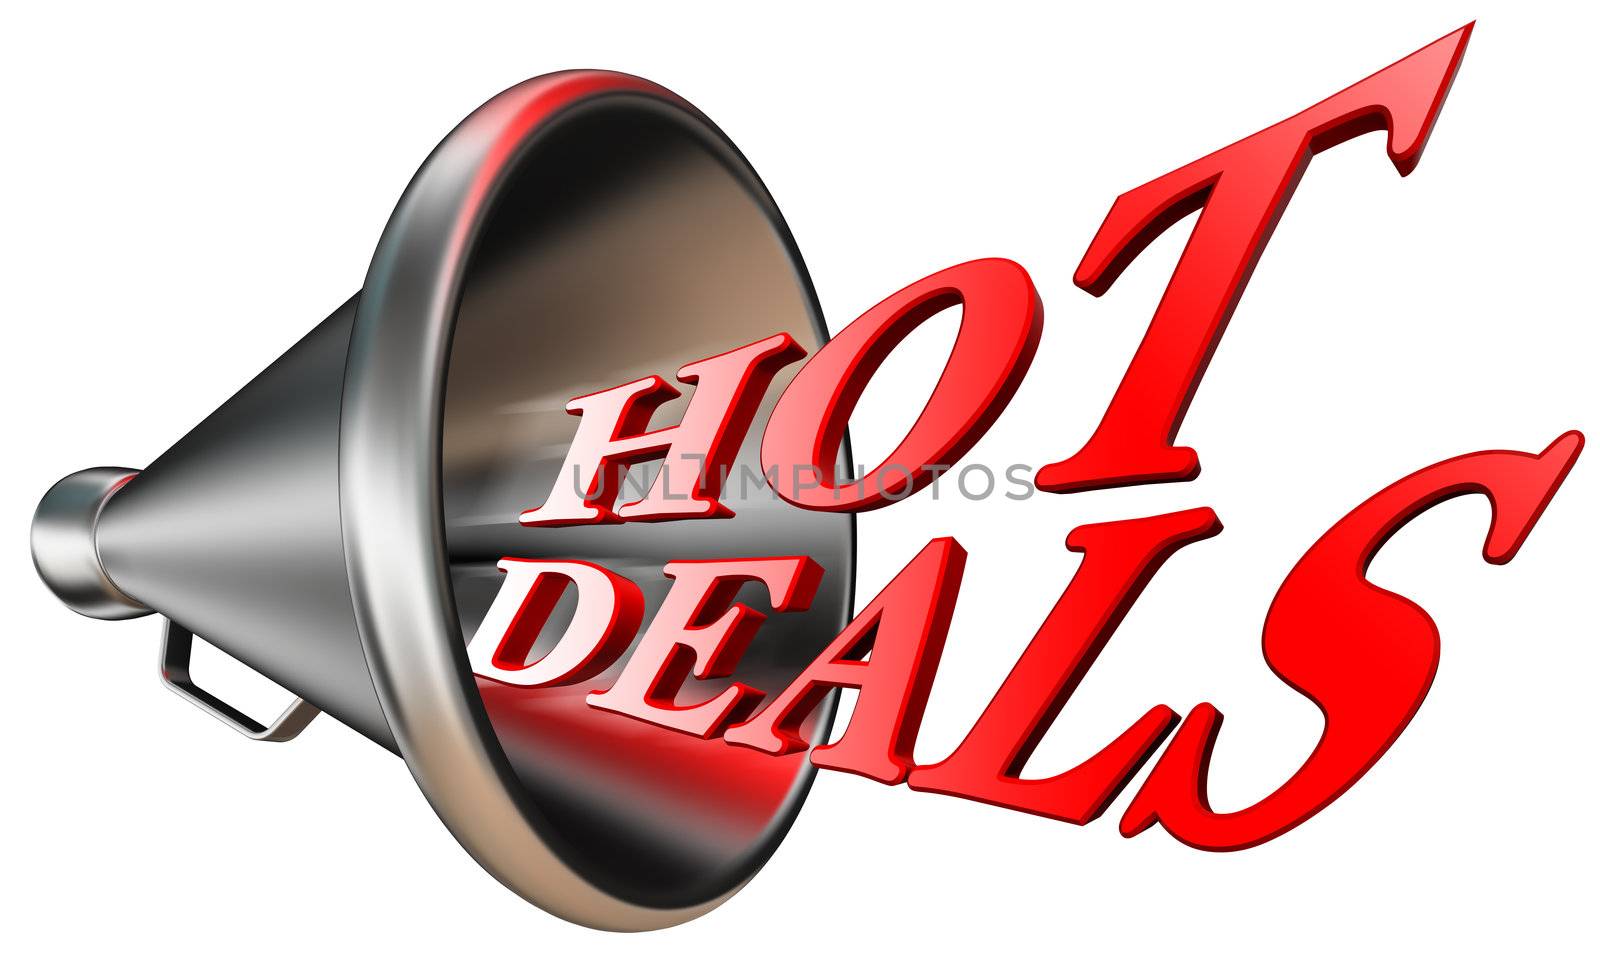 hot deals red word in megaphone isolated on white background. clipping path included